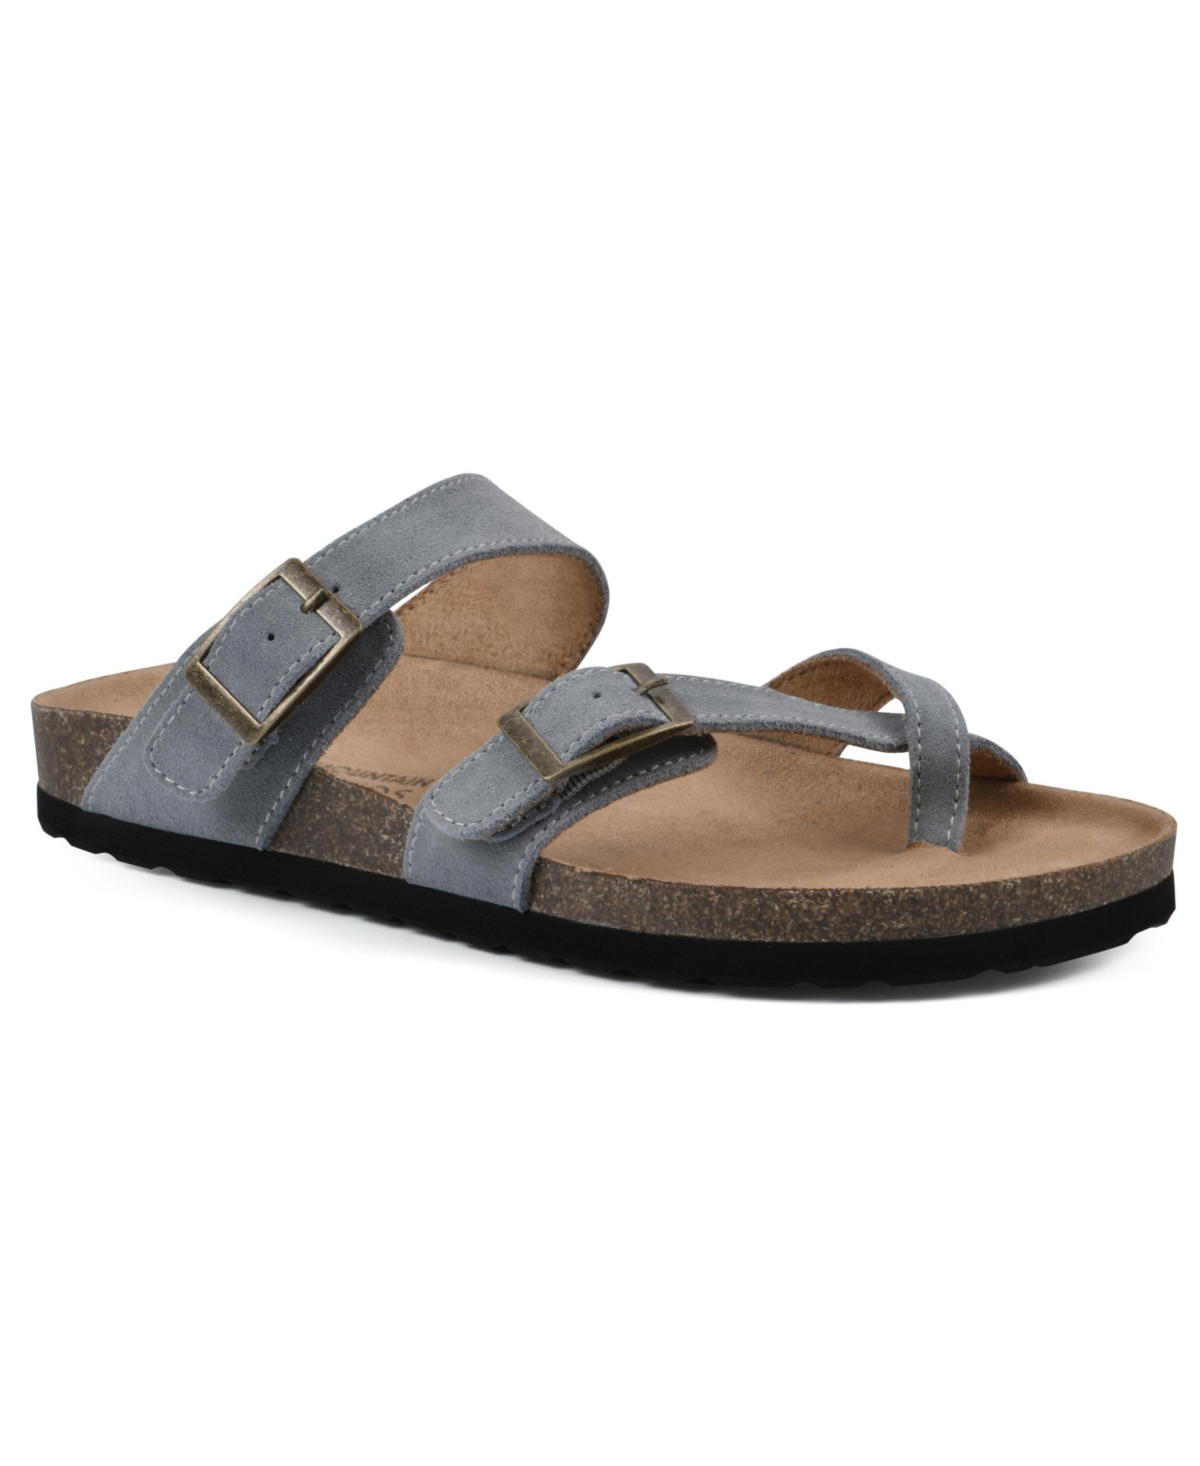 Women's Gracie Footbed Sandals - Blue Raspberry Leather